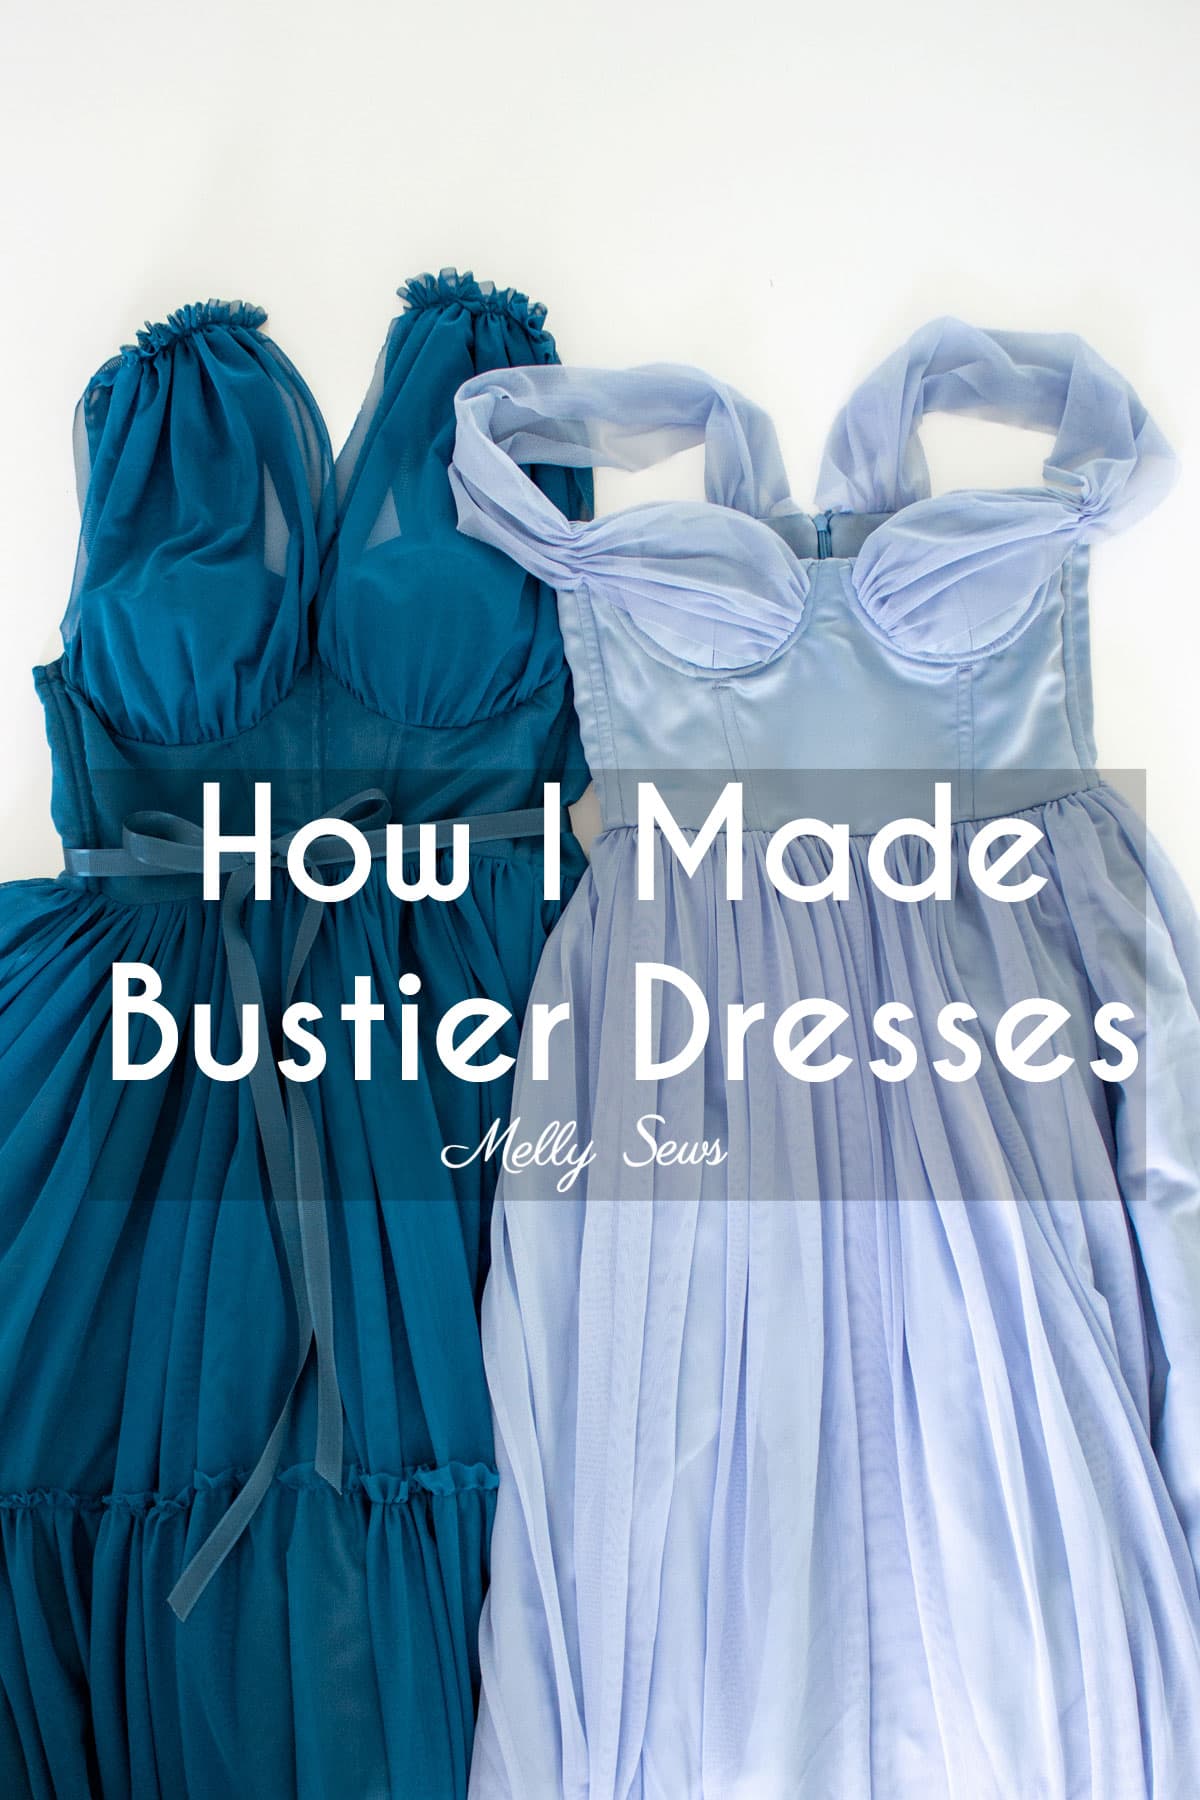 How to Draft the FRONT BRA TOP Pattern (Bustier / Tube) (watch in